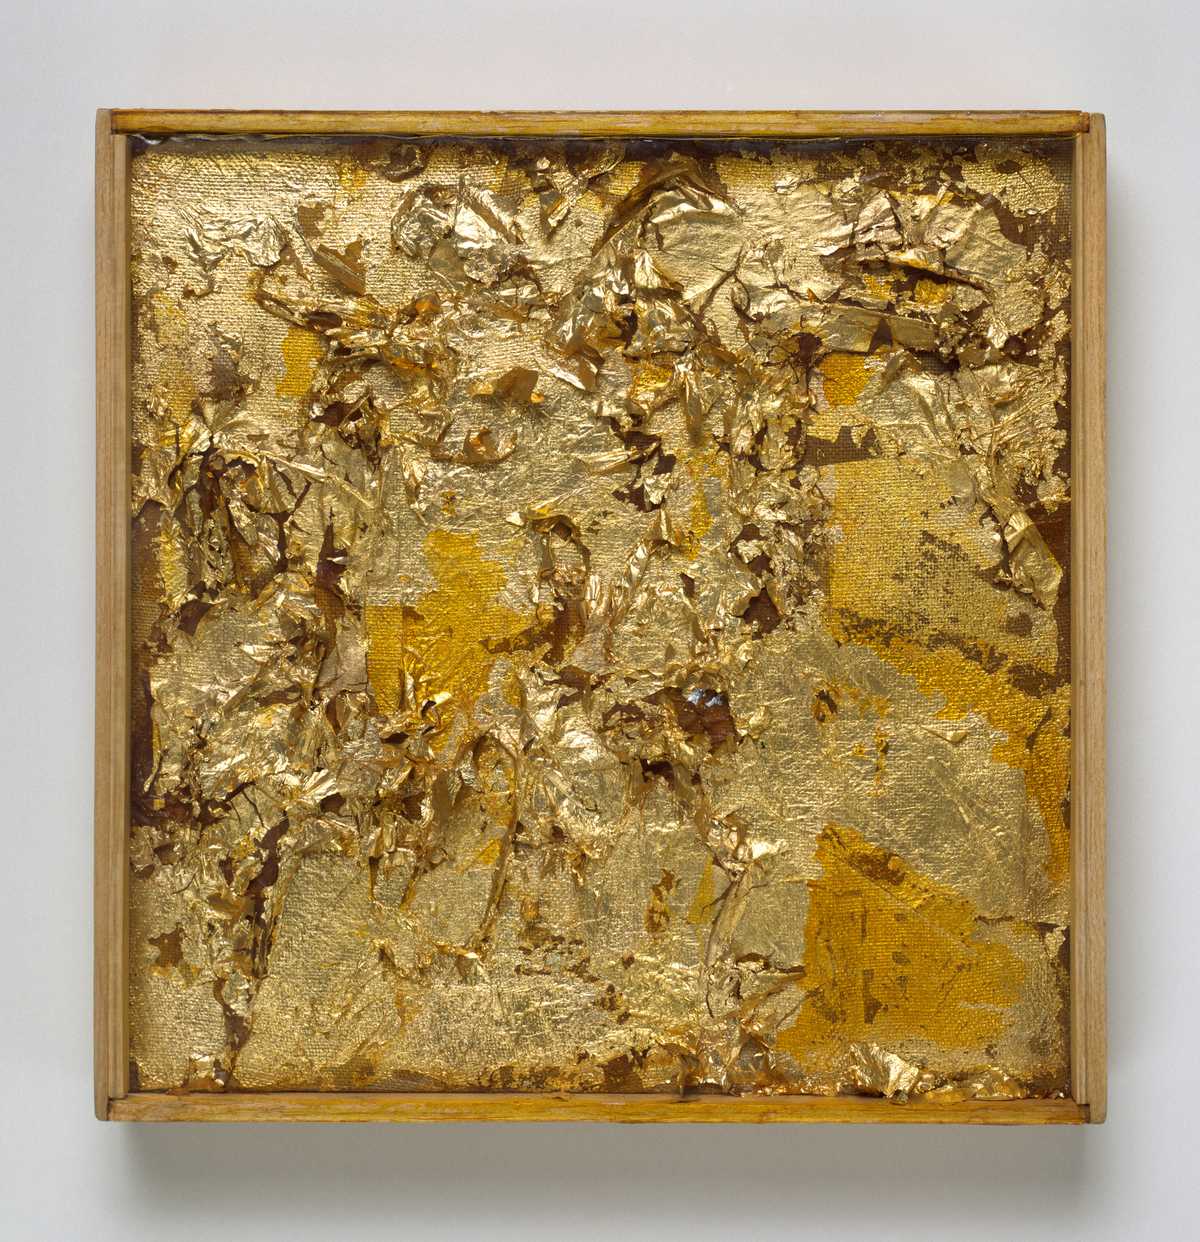 A square work of art with flaking gold leaf on a canvas